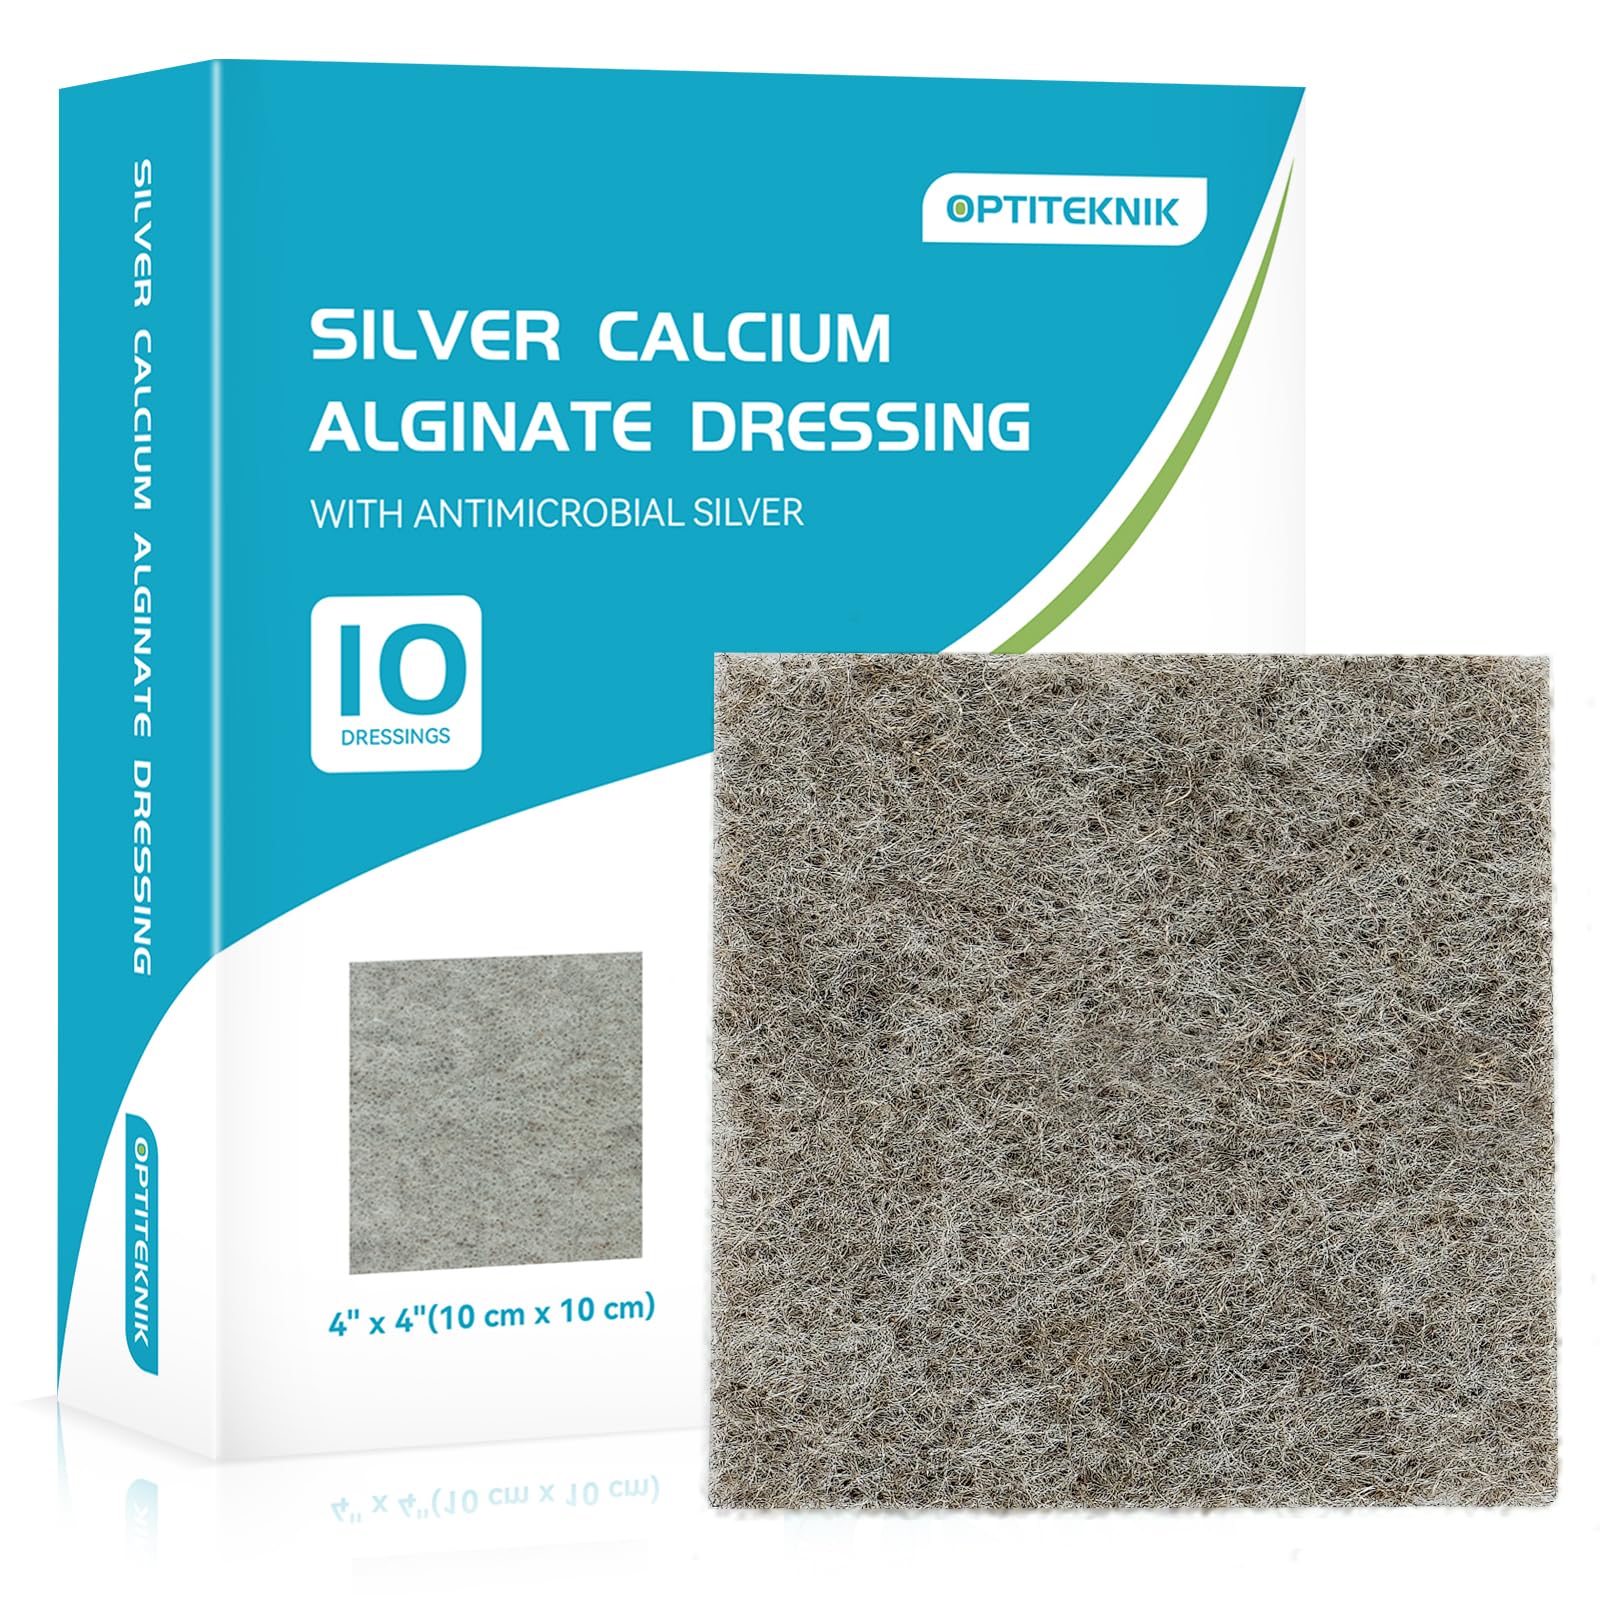 OPTITEKNIK Ag Silver Calcium Alginate Wound Dressing Pads 4"x4" Pack of 10, Soft Silver Dressings for Wound Care, Gentle Highly Absorbent Dressing, Non Stick Gauze Pads for Wounds